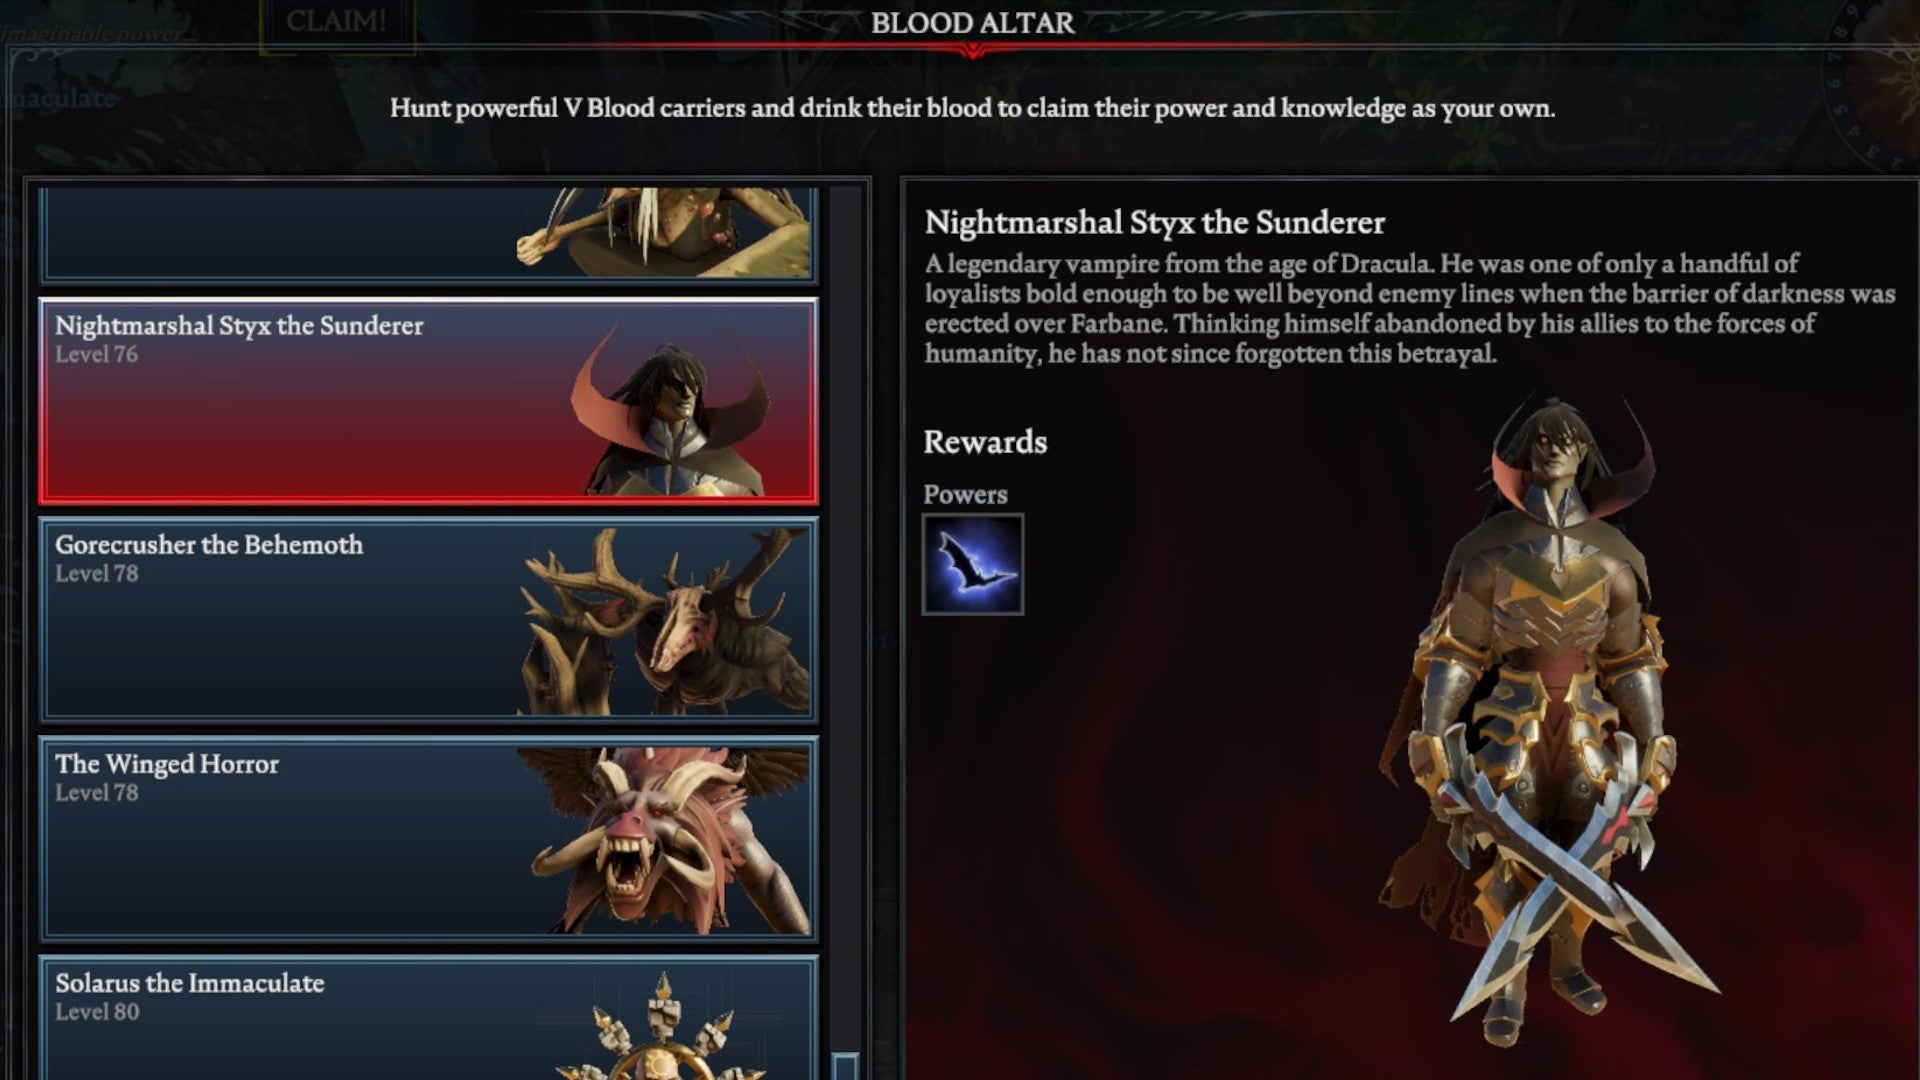 V Rising Nightmarshal Styx the Sunderer Blood Altar tracking page, showing an image of the vampire on the right and a list of bosses on the left